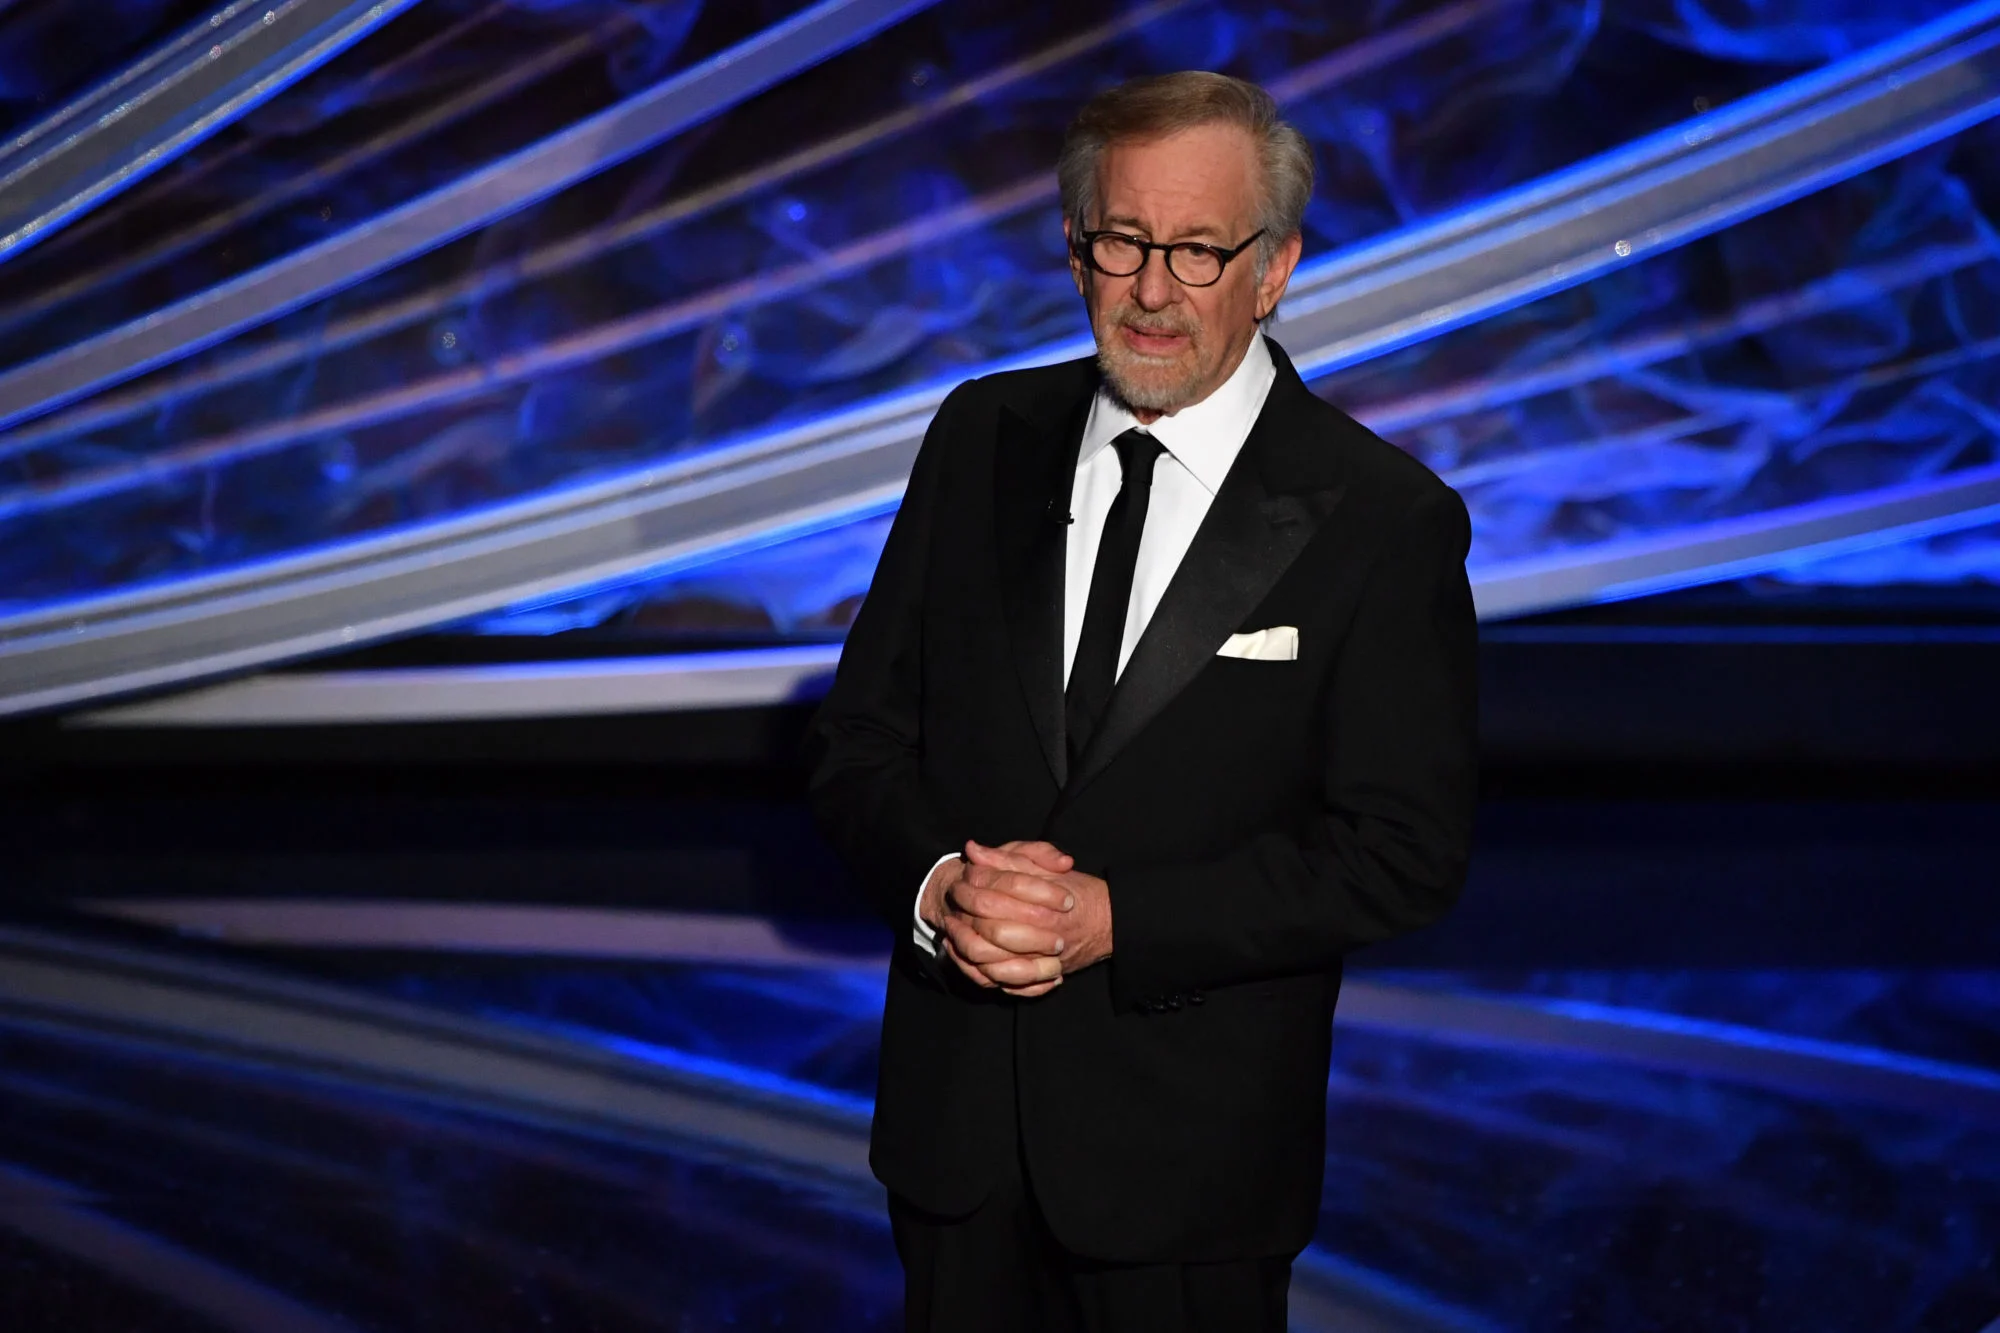 US director Steven Spielberg speaks onstage during the 92nd Oscars at the Dolby Theatre in Hollywood, California, in February 2020. Photo: AFP